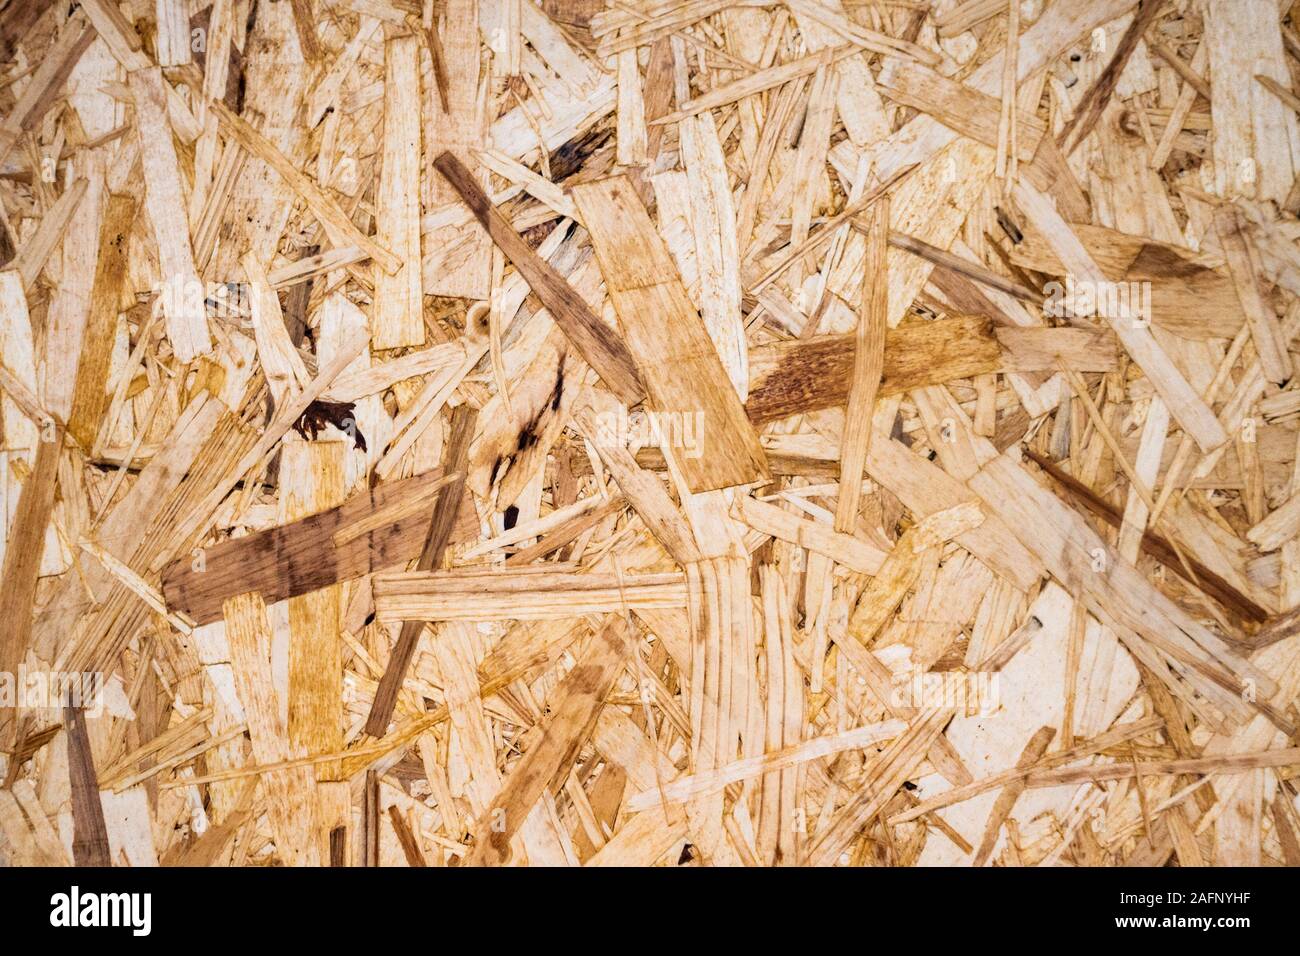 358 Chipboard Texture Stock Photos, High-Res Pictures, and Images - Getty  Images